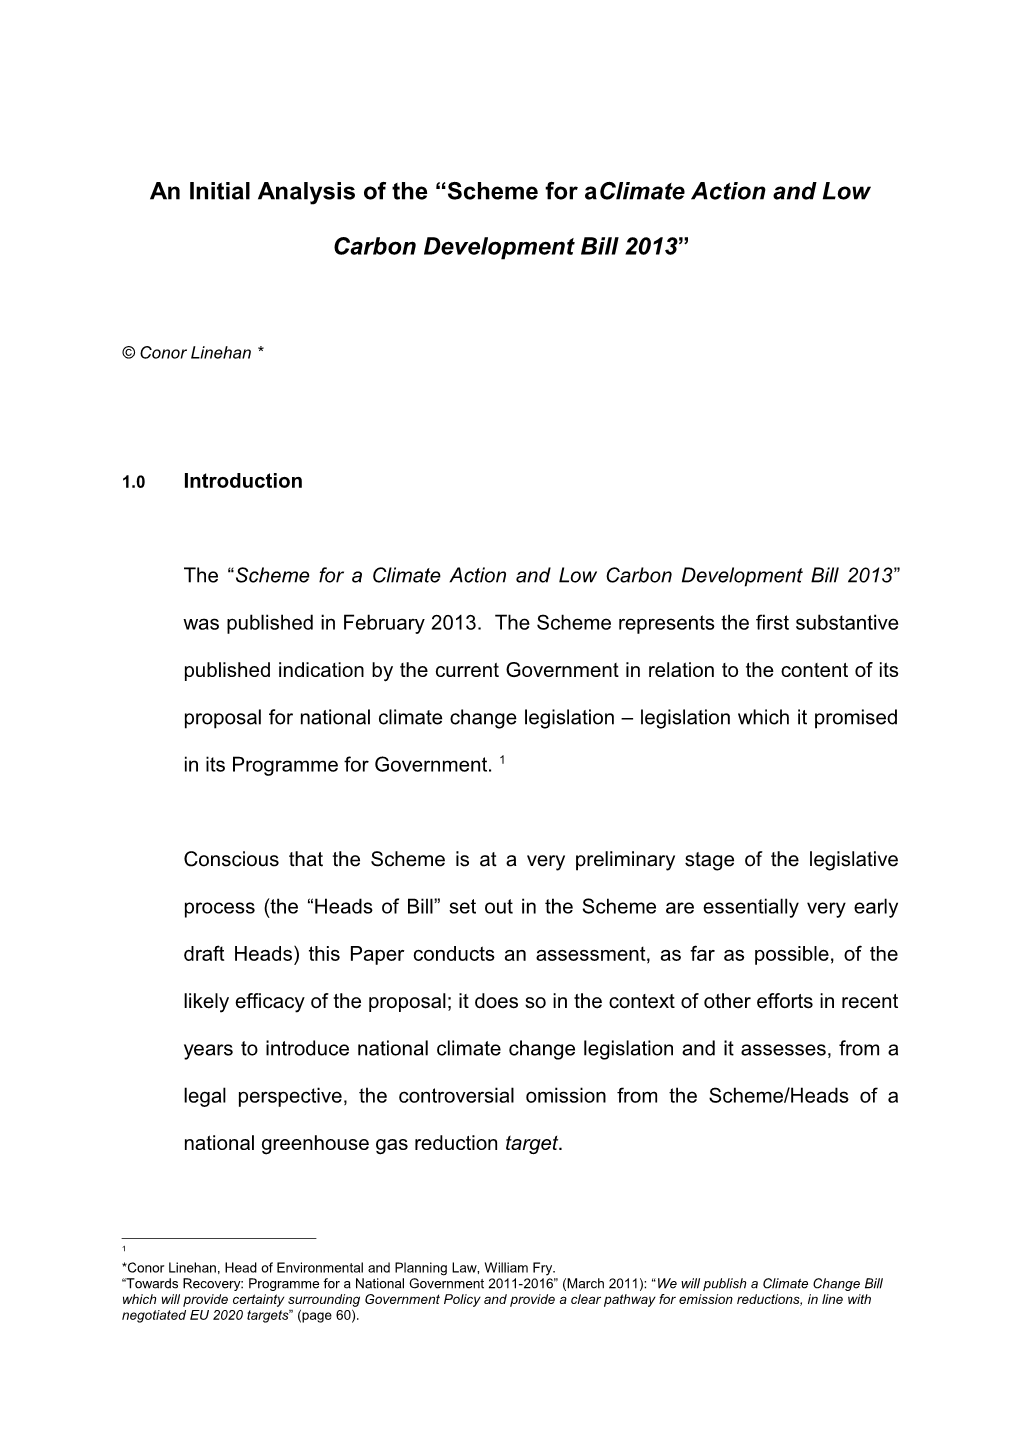 An Initial Analysis of the Scheme for Aclimate Action and Low Carbon Development Bill 2013